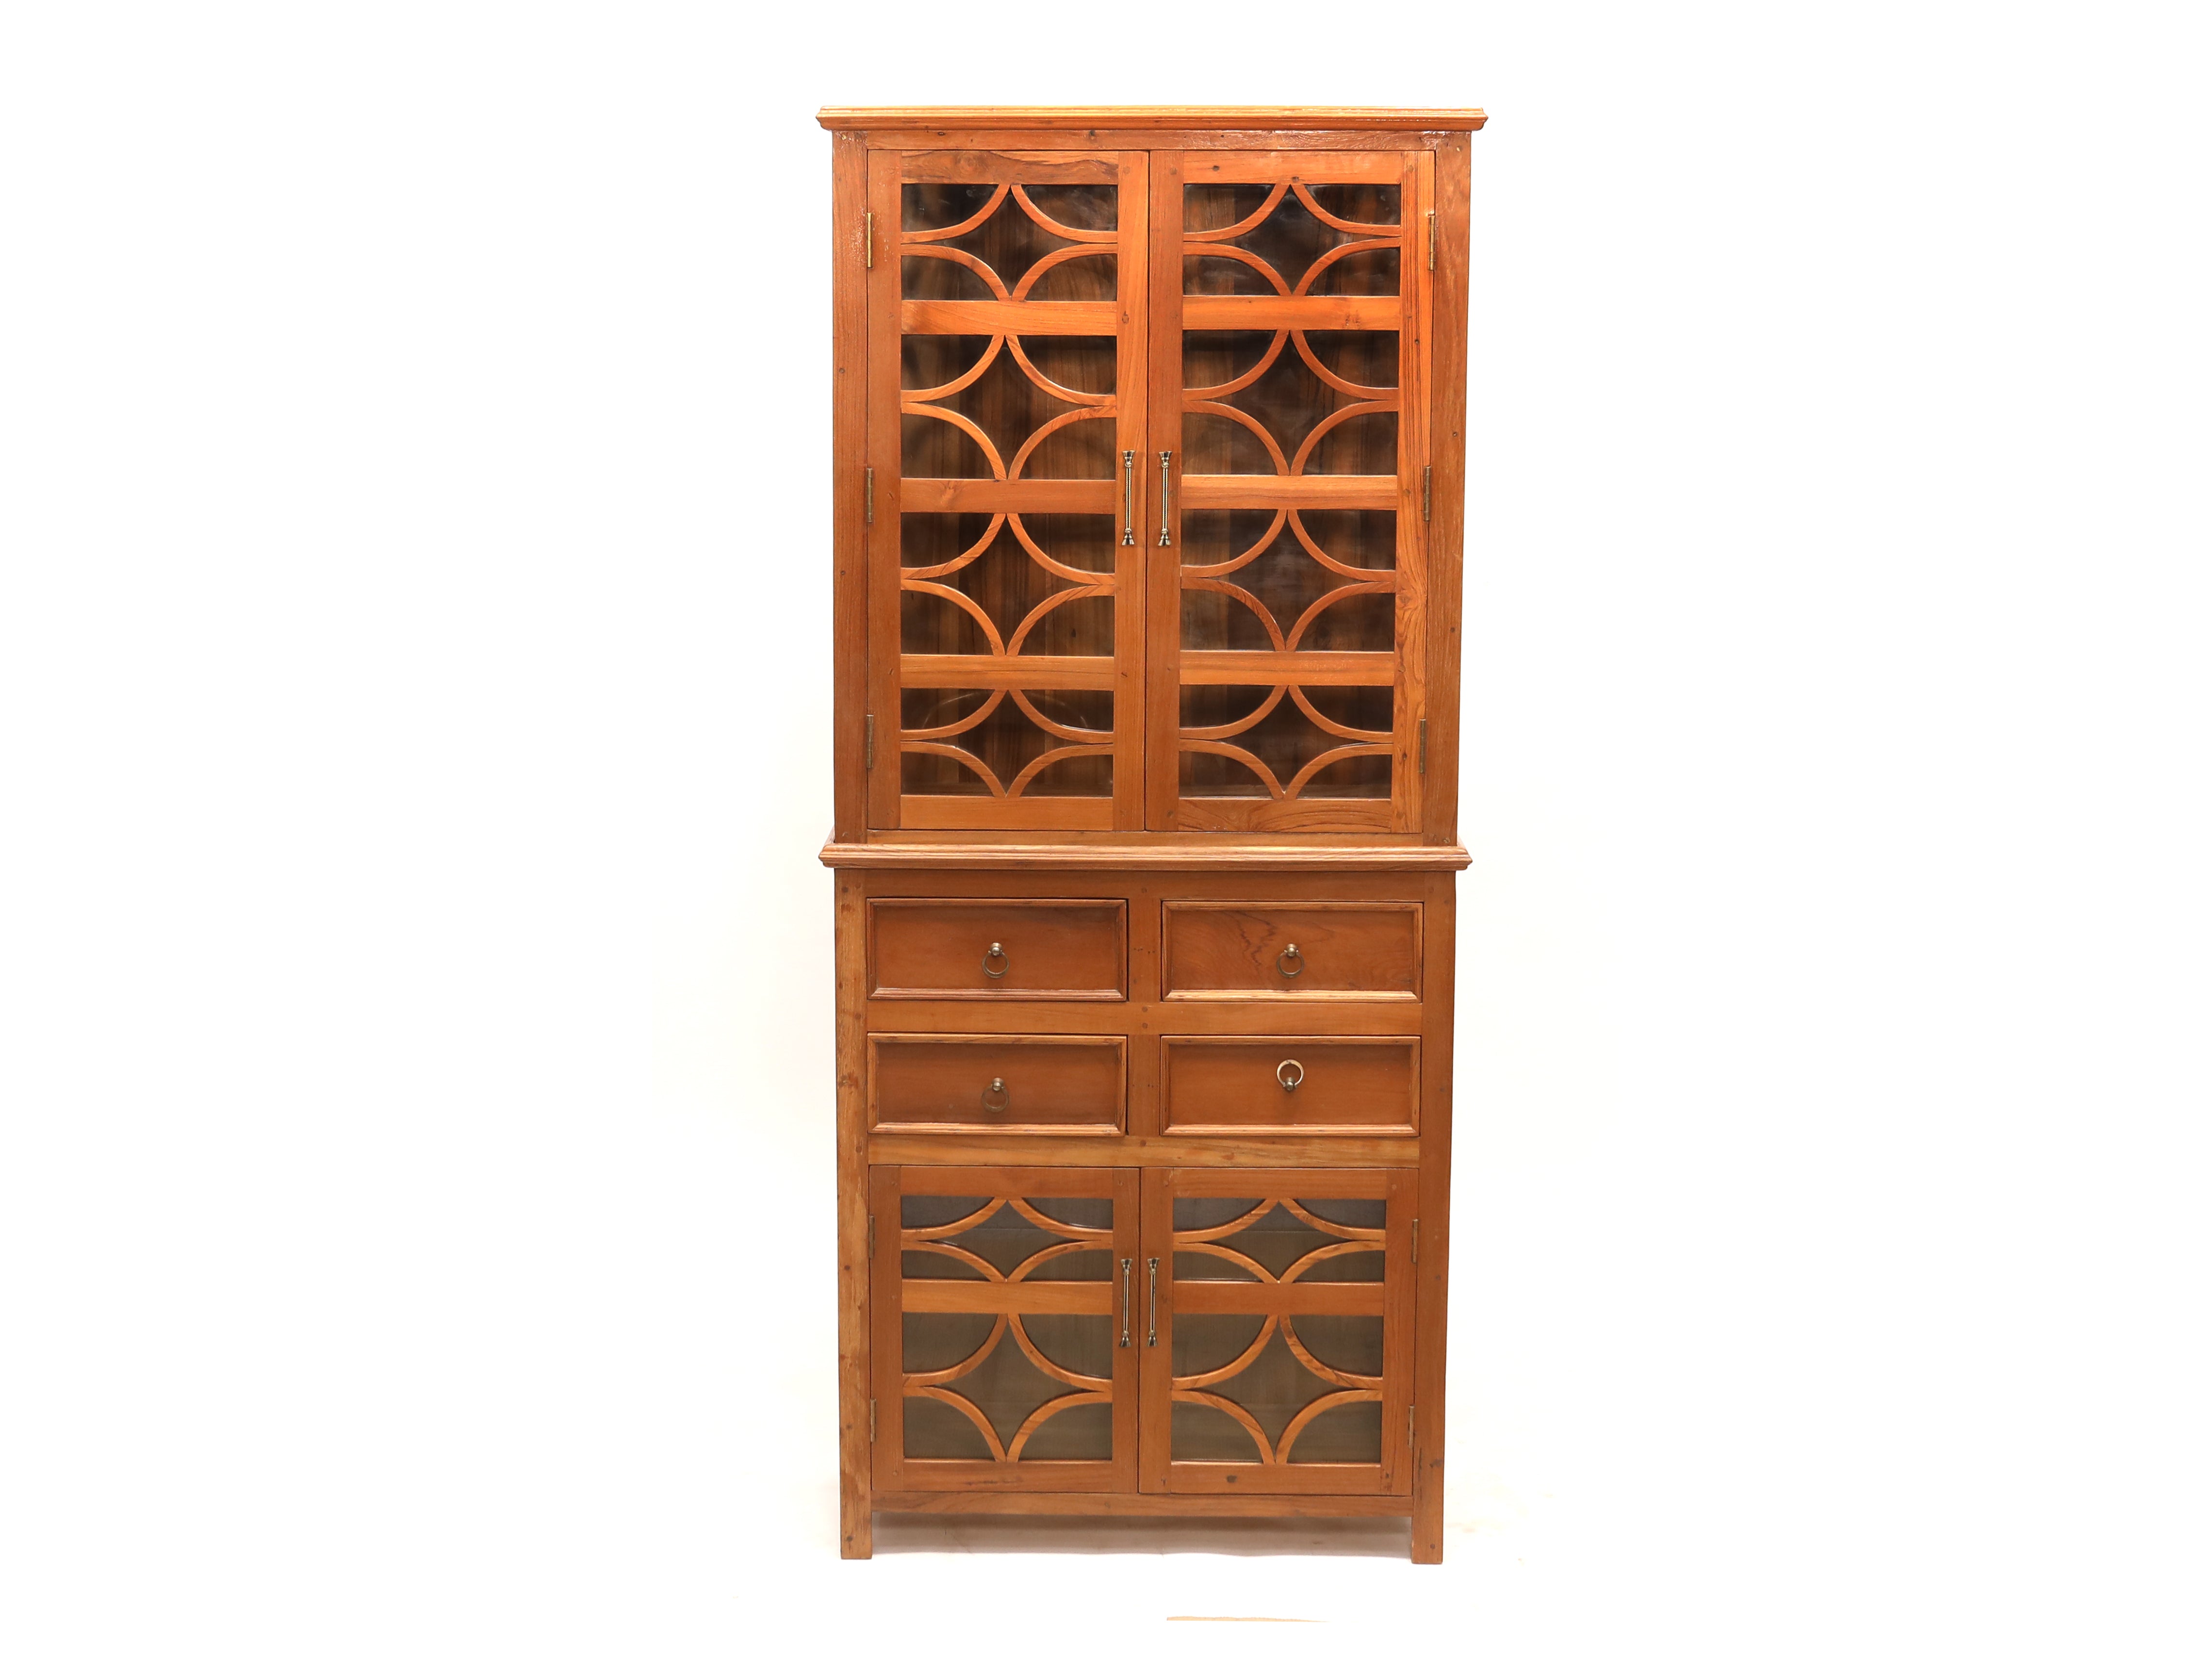 2-Part Drawers and Double-Doors Cabinet Showcase